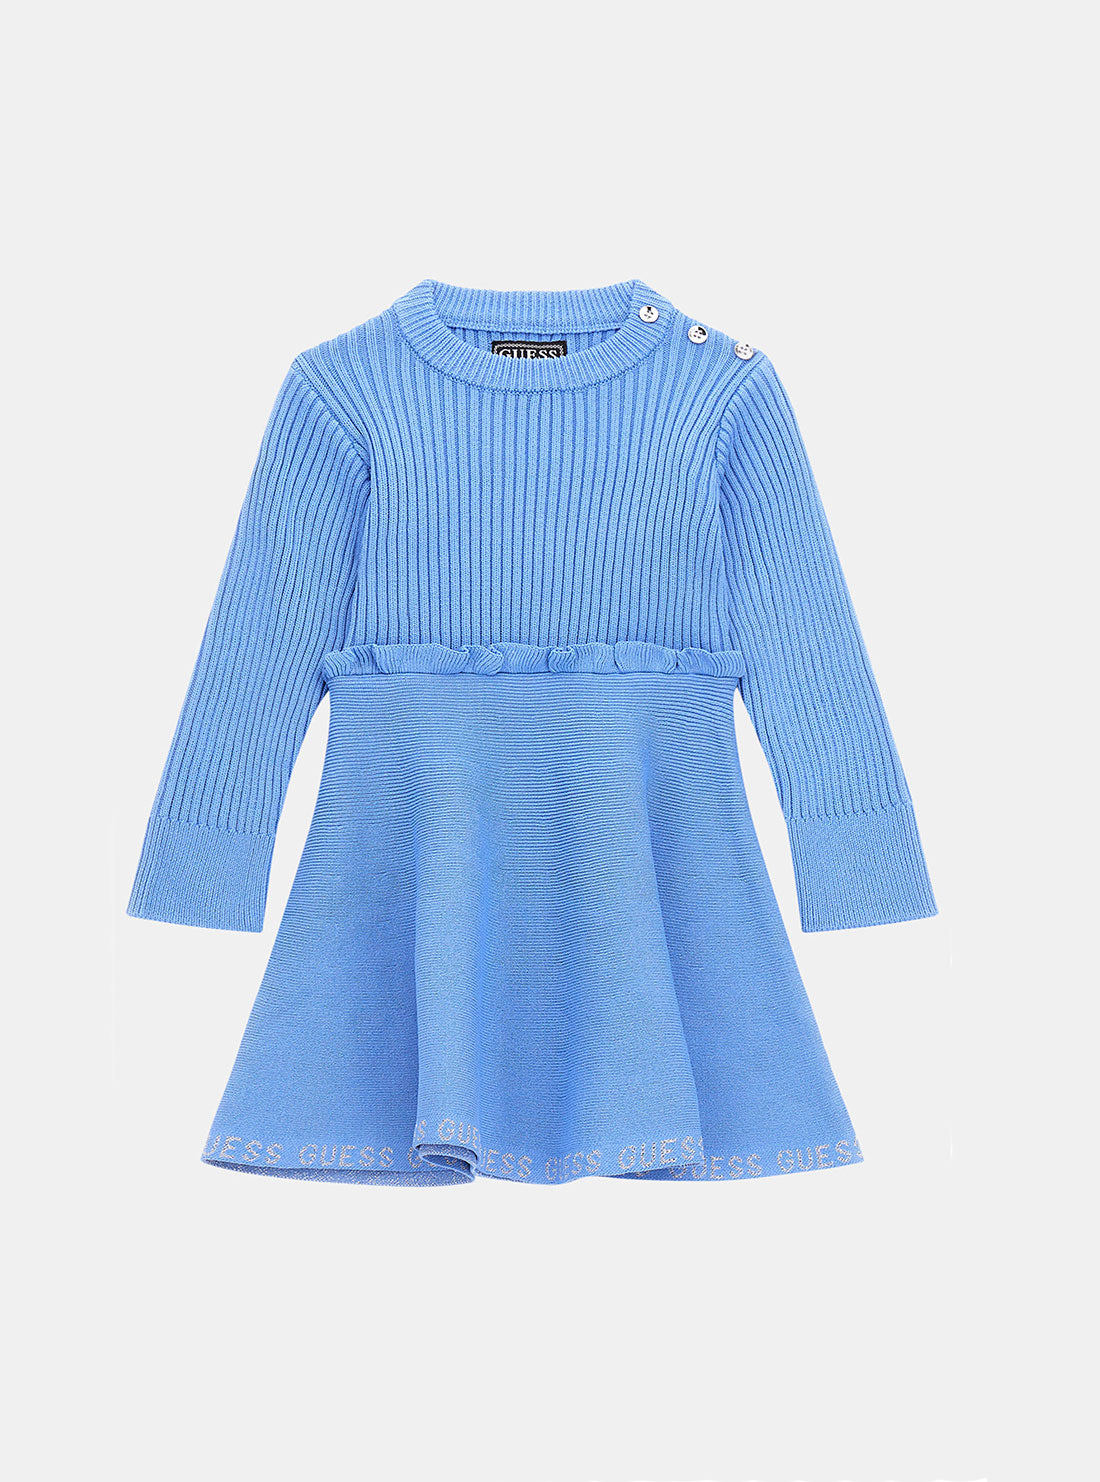 GUESS Blue Long Sleeve Knit Dress (2-7) front view